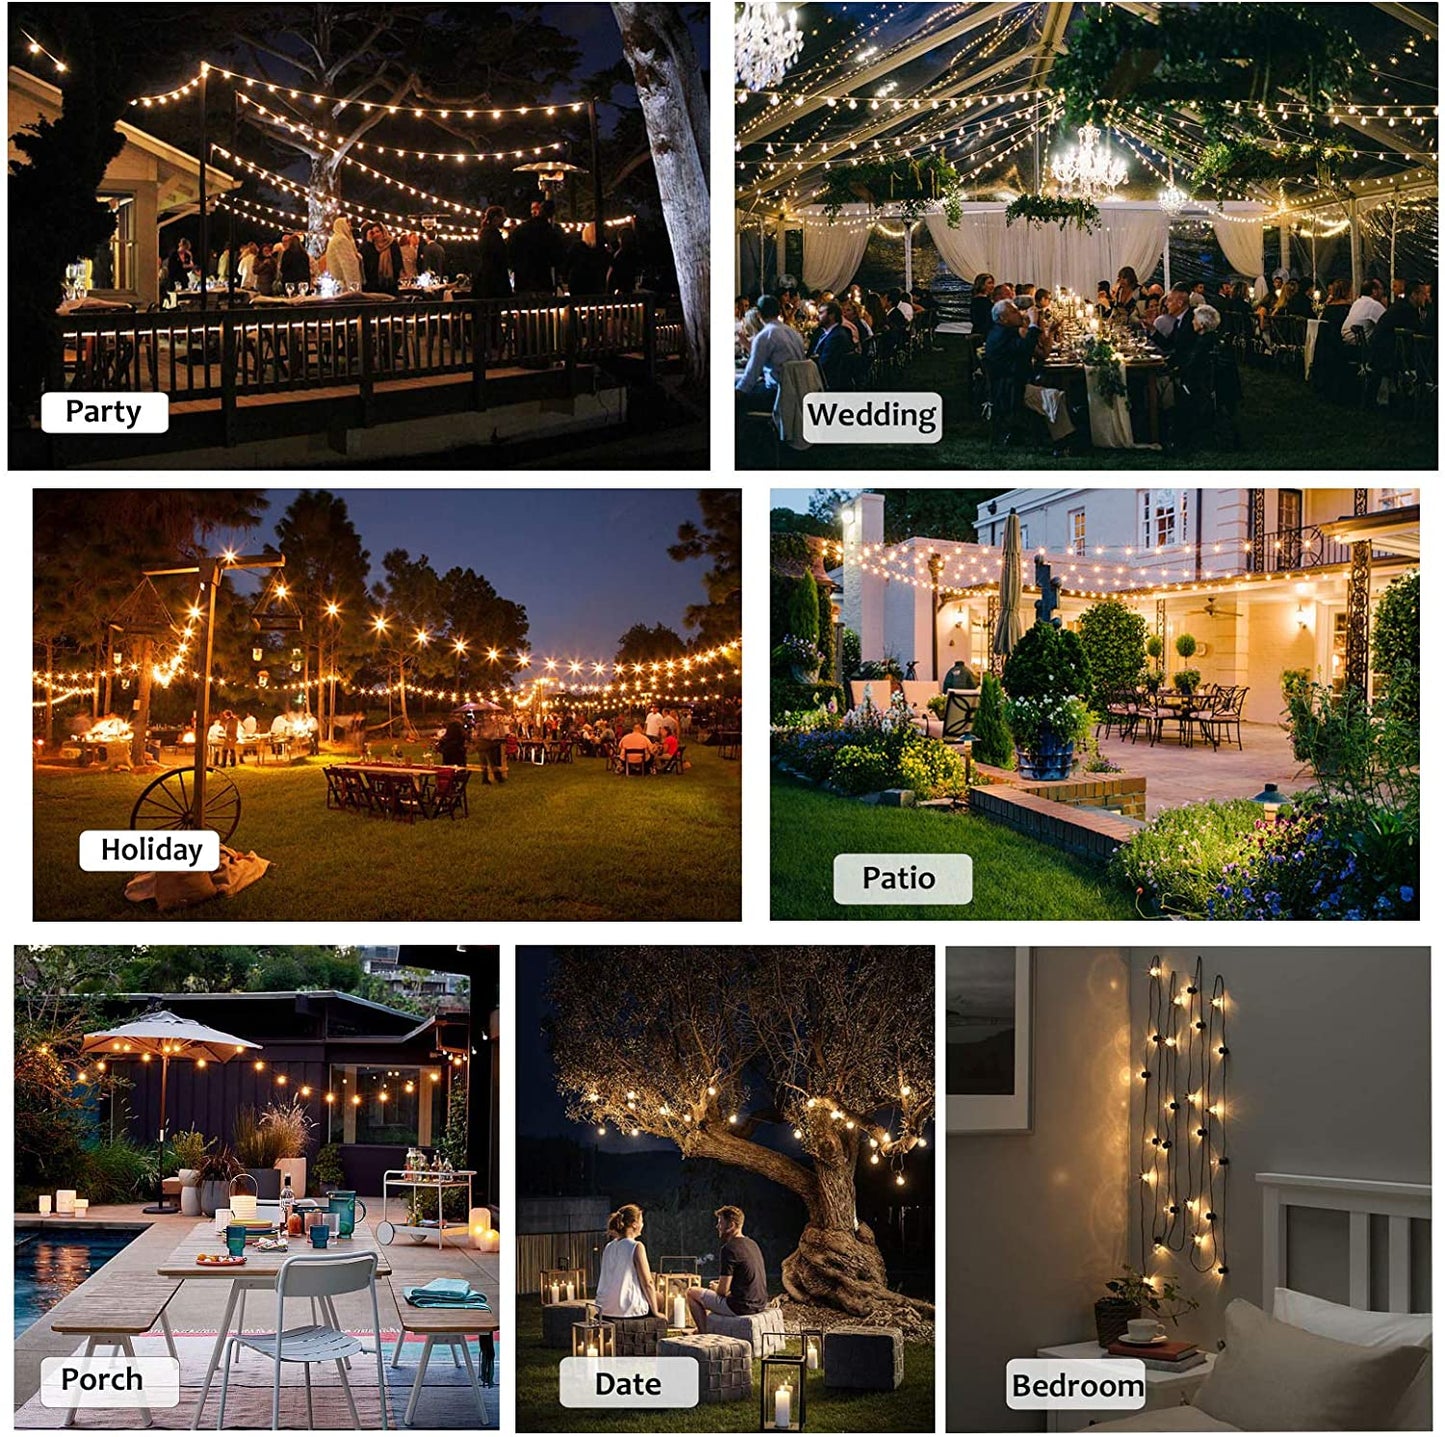 Outdoor String Lights 29ft G40 Patio Lights String with 16 Shatterproof Globe LED Bulb,Waterproof Connectable Hanging Lights for Porch Balcony Bistro,2700K Warm Glow Cafe Lights with E12 Socket